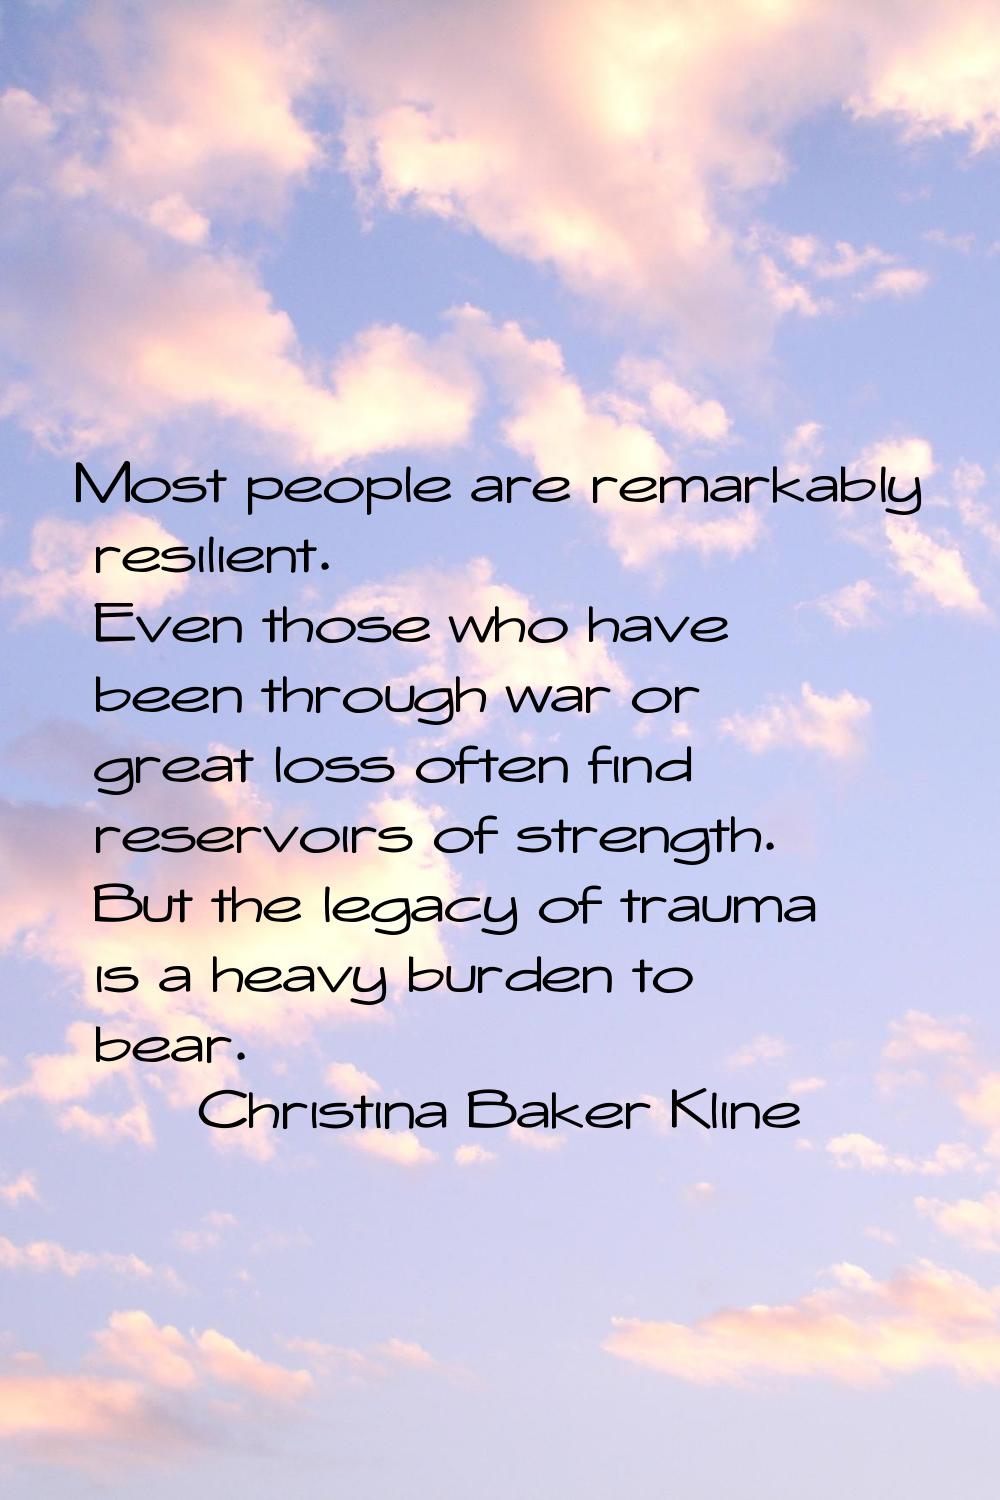 Most people are remarkably resilient. Even those who have been through war or great loss often find